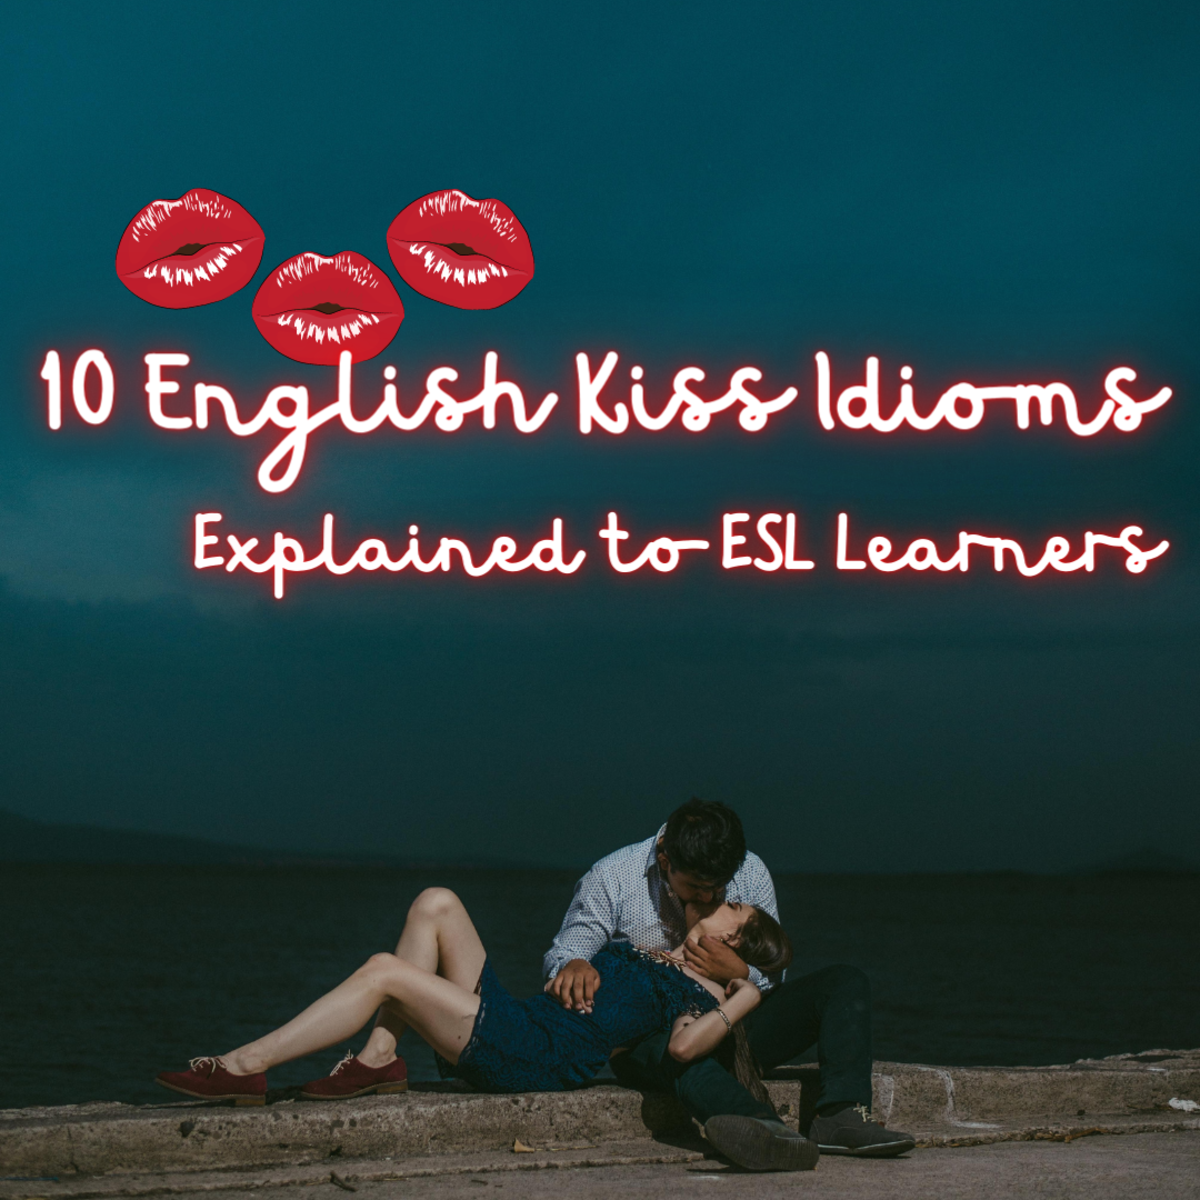 10 Kiss Idioms Explained to ESL Students